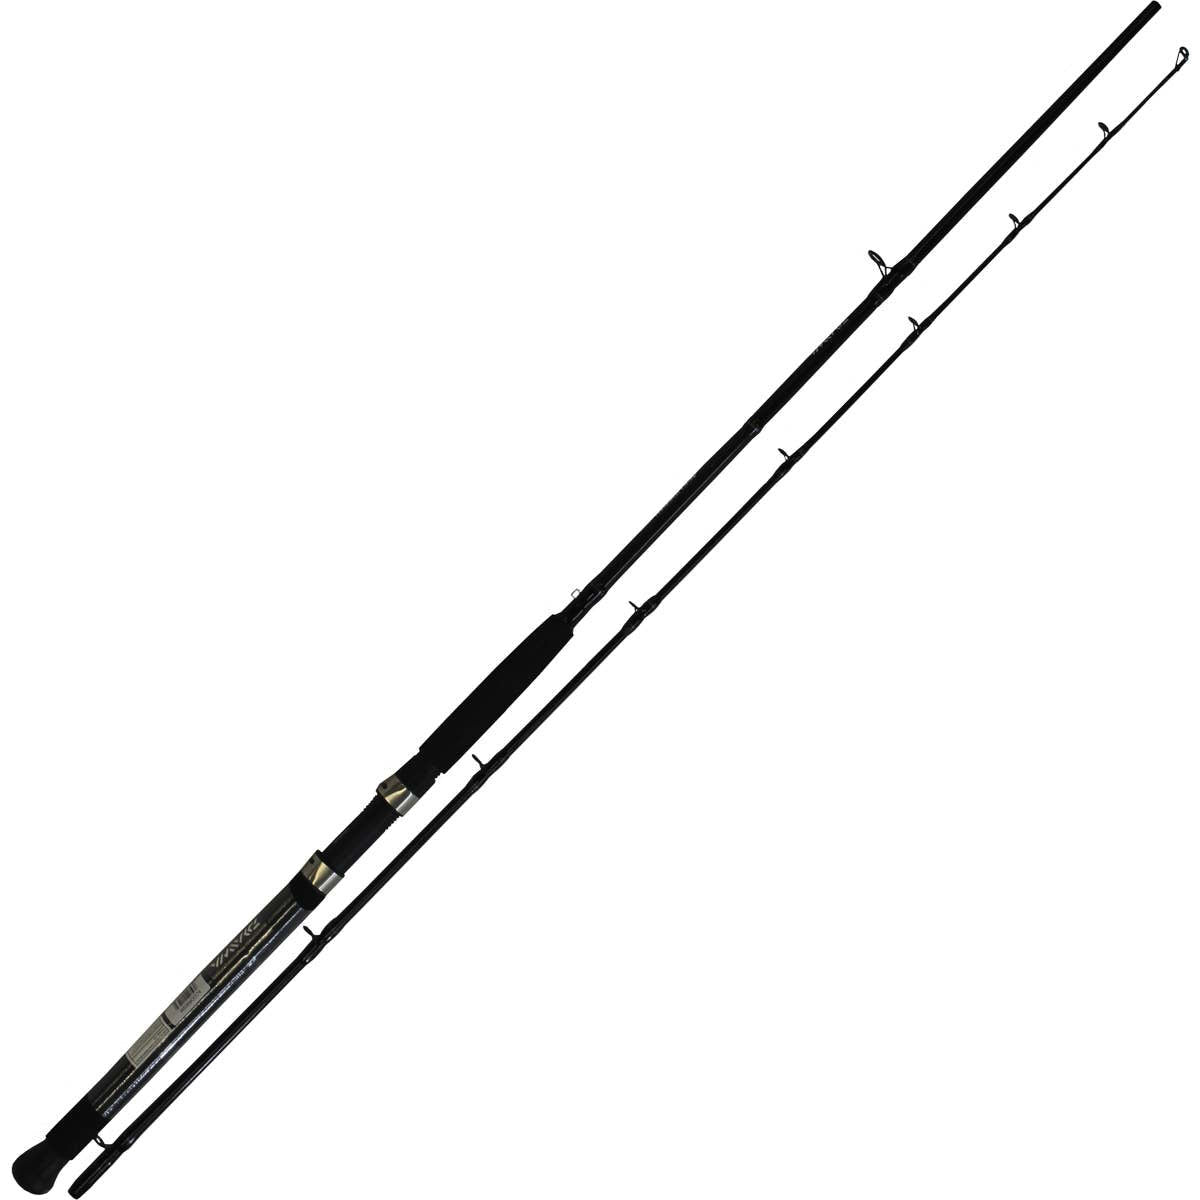 Photo of Daiwa AccuDepth Specialty Series Downrigger Trolling Rod for sale at United Tackle Shops.